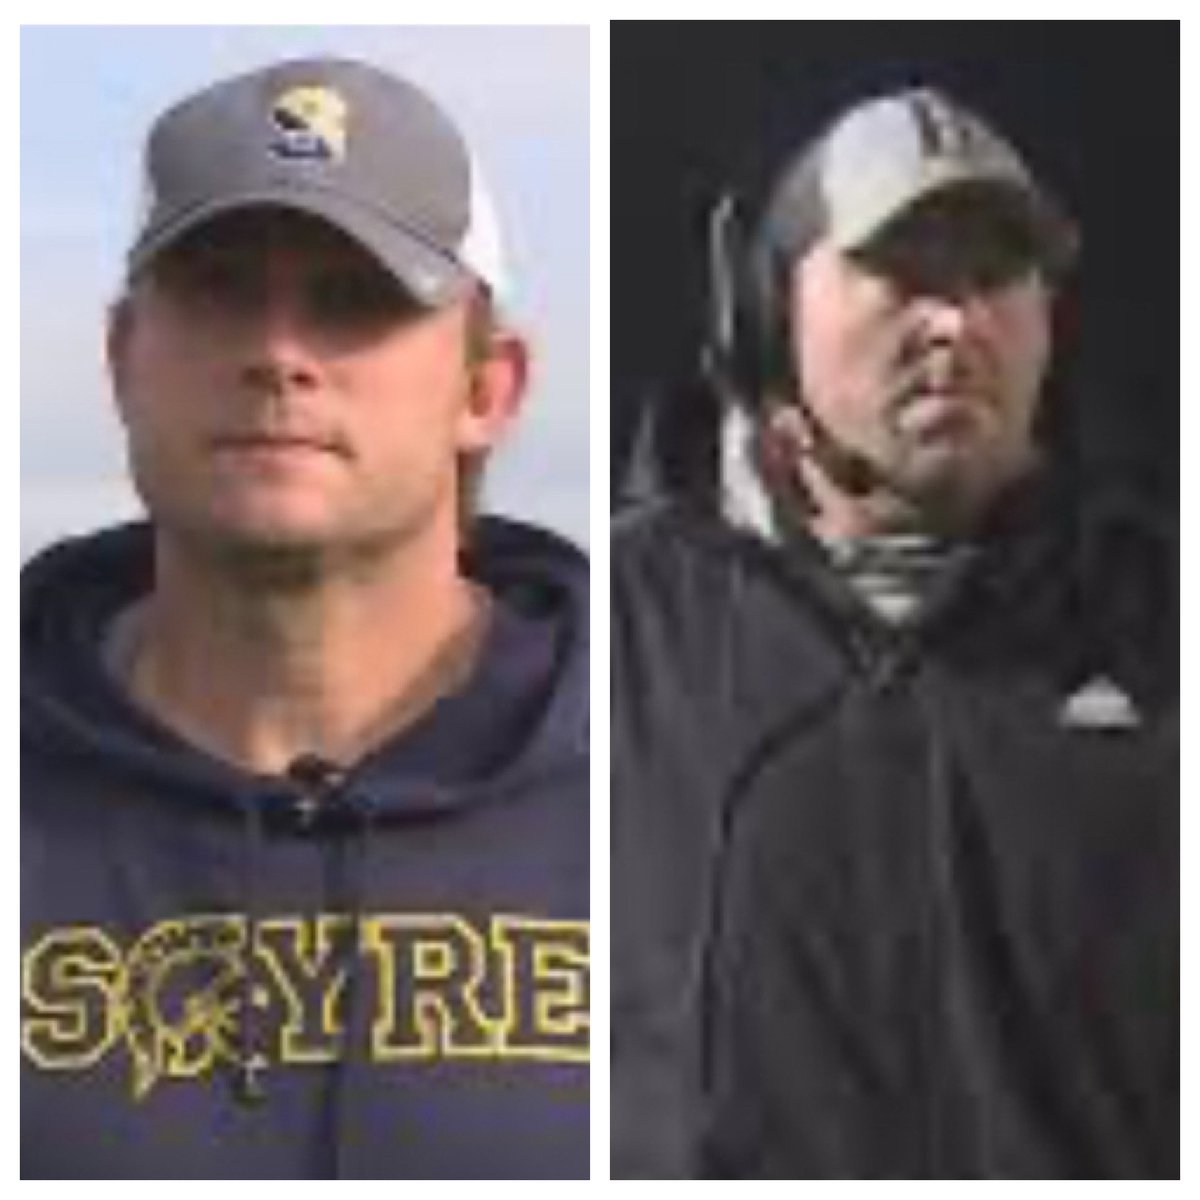 Best of luck to these former @HerdFB greats, as they lead their teams into the 3rd round of @KHSAA playoffs. Two phenomenal young men leading their teams deep in post-season play. @ChadPennington • @lexsayrefb @coachnatemcpeek • @FDouglassFB #HerdFamily #OneHerd